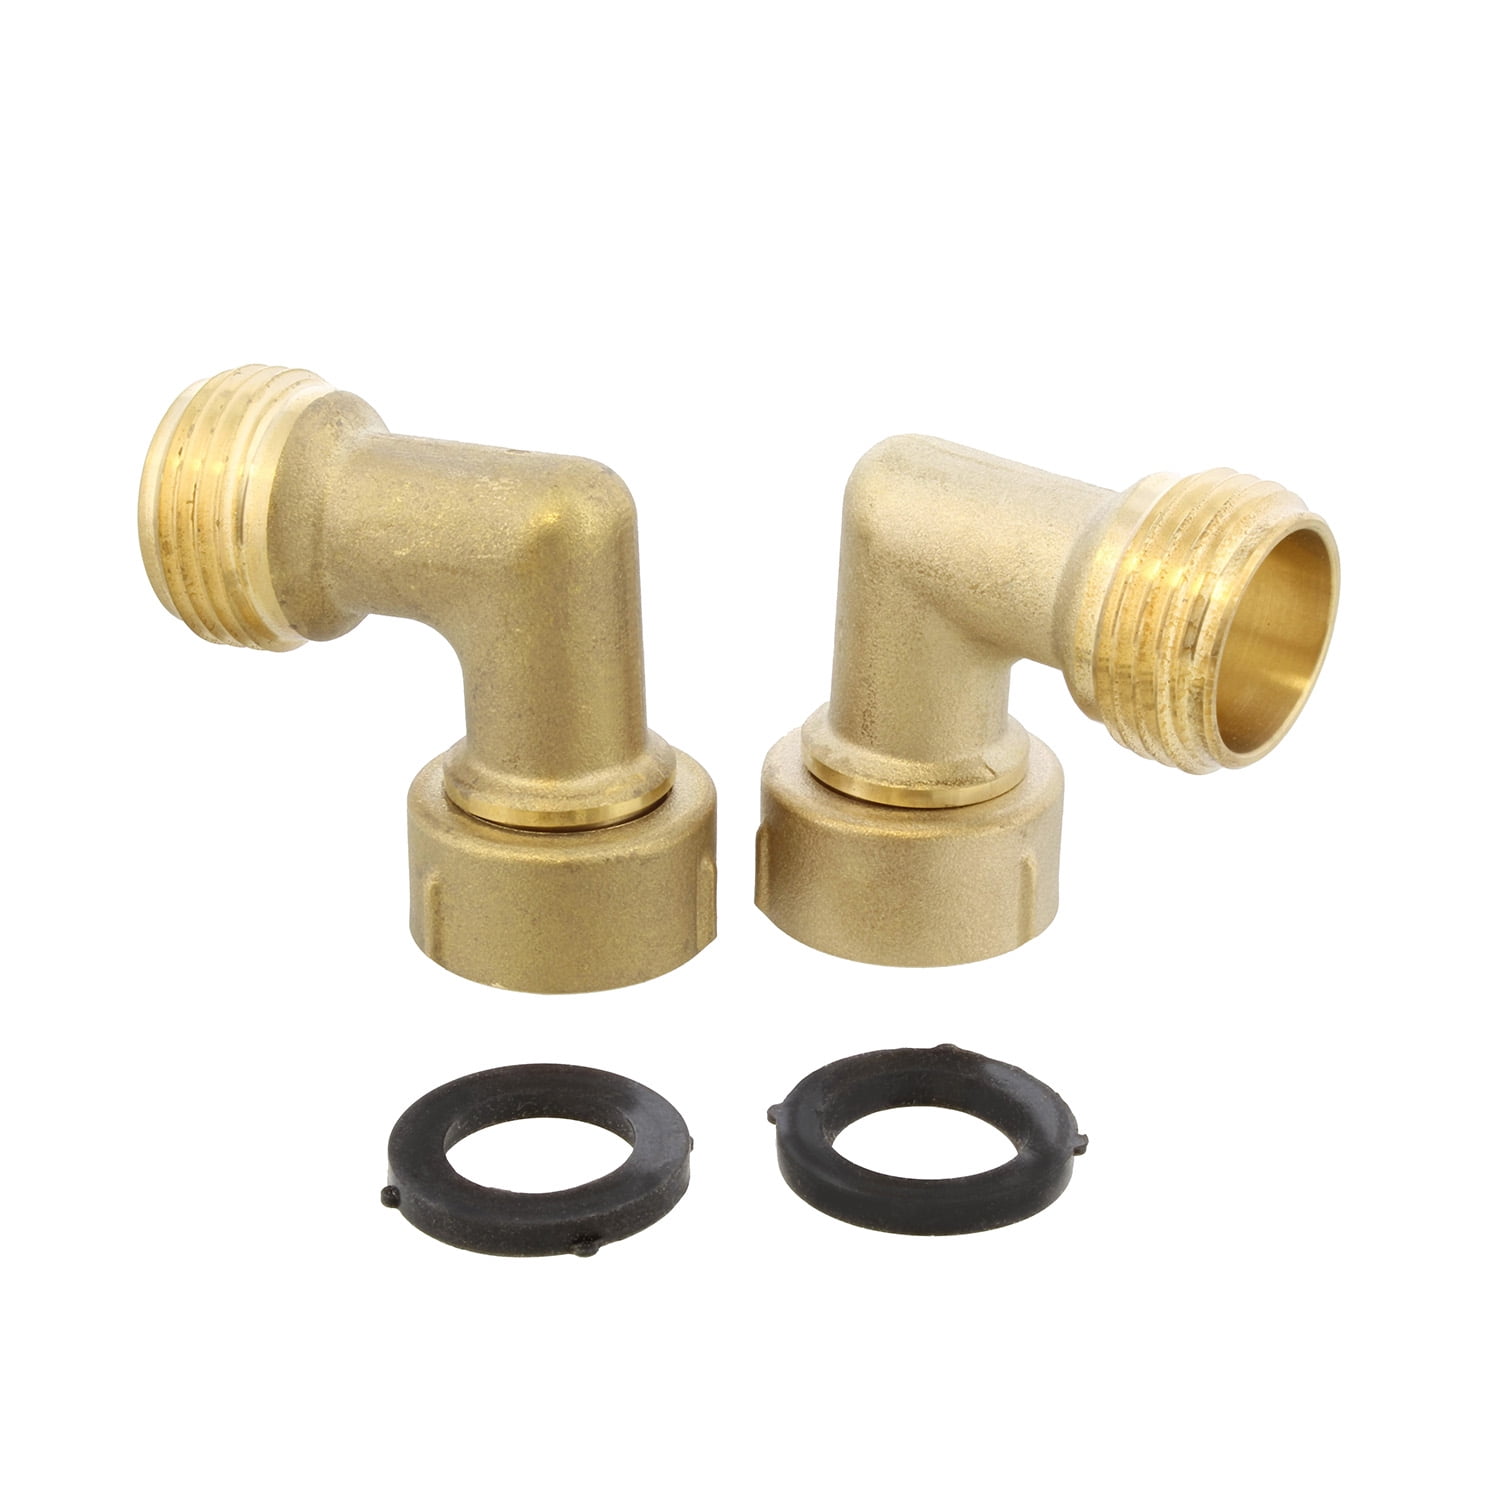 Hose Connector Spigot Extender Outdoor Faucet Extender Dumble 45 Degree Garden Hose Elbow Fitting 2pk with 4 Washers 